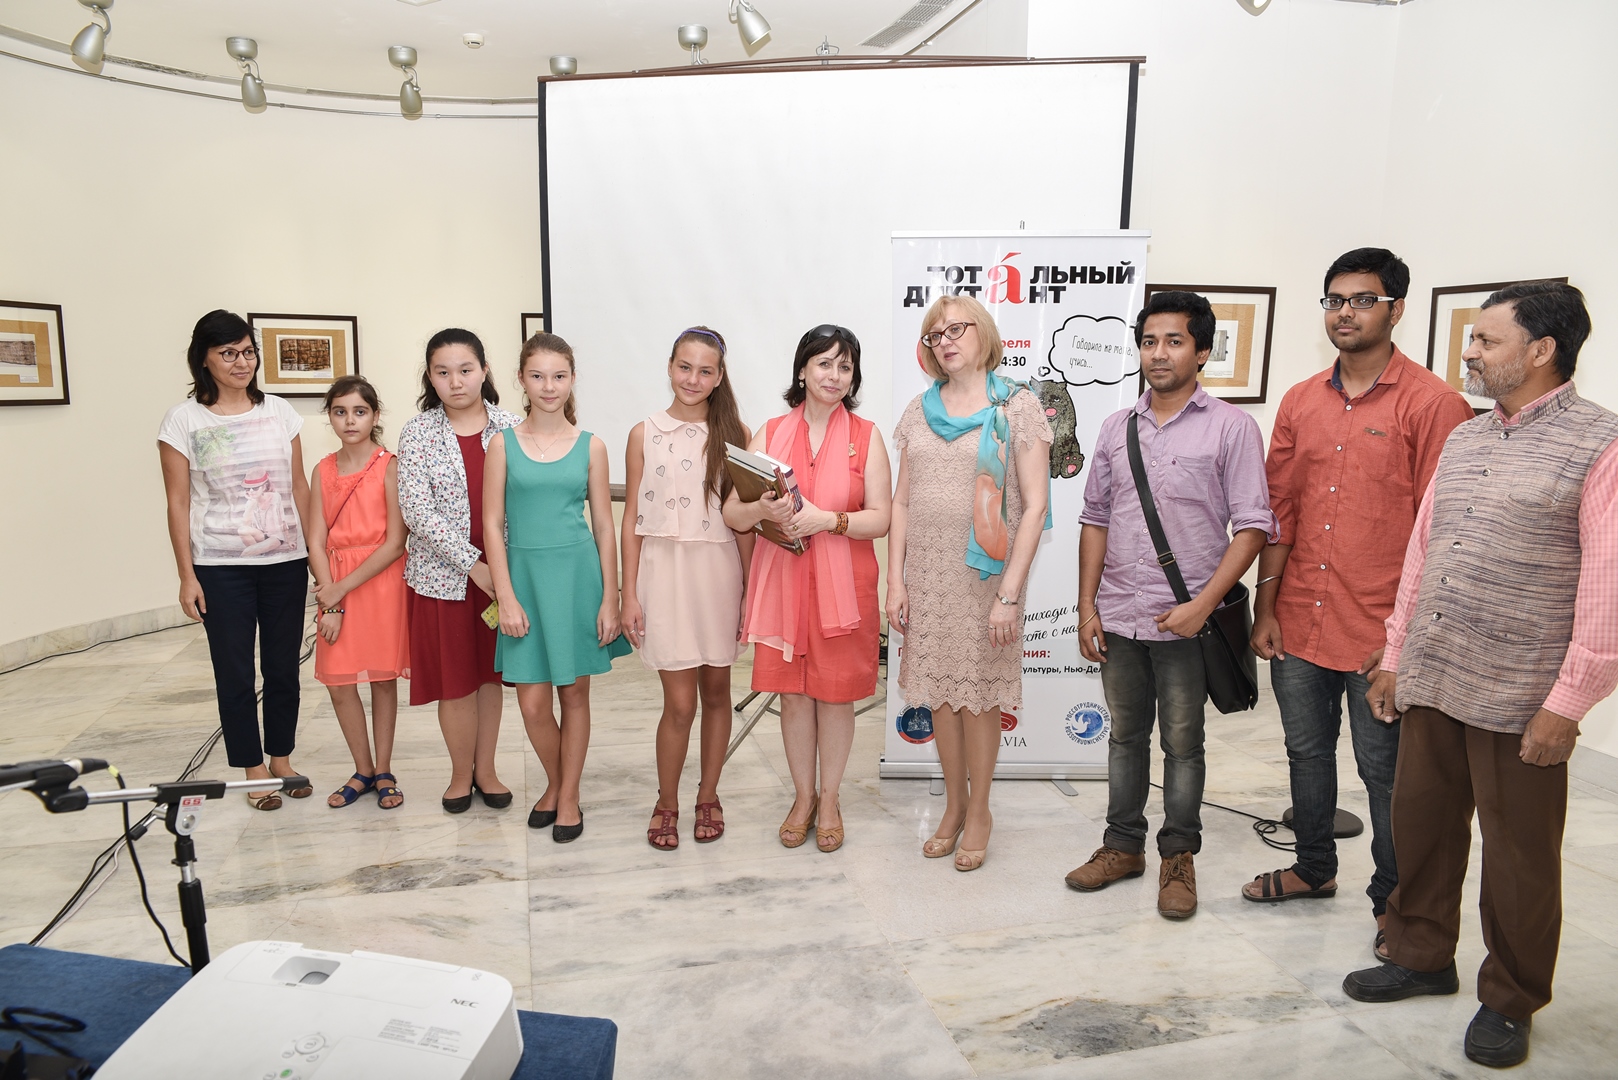 A fair number of Russian language students, students of the Russian Embassy School, Russian compatriots, and others attended the function.